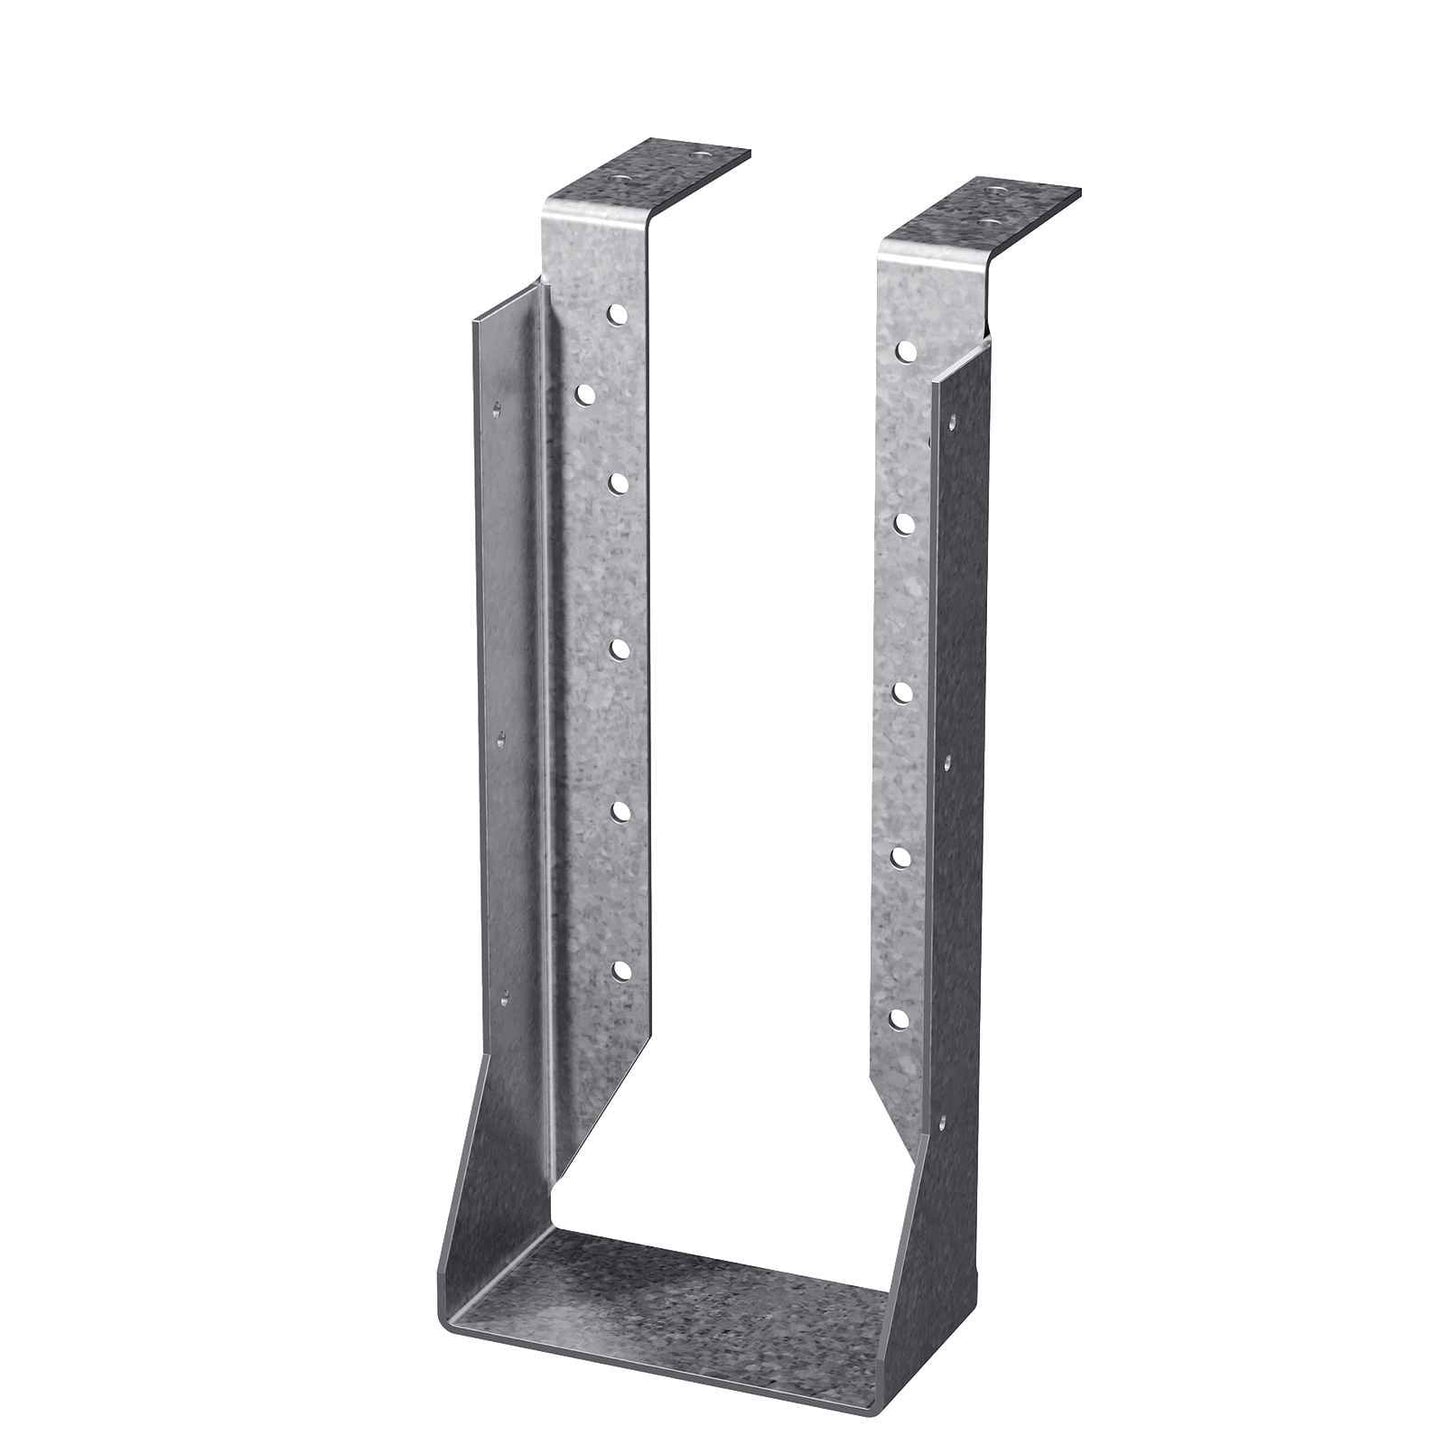 Simpson HUC210-3TF Heavy Top-Flange Hanger with Concealed Flanges - G90 Galvanized